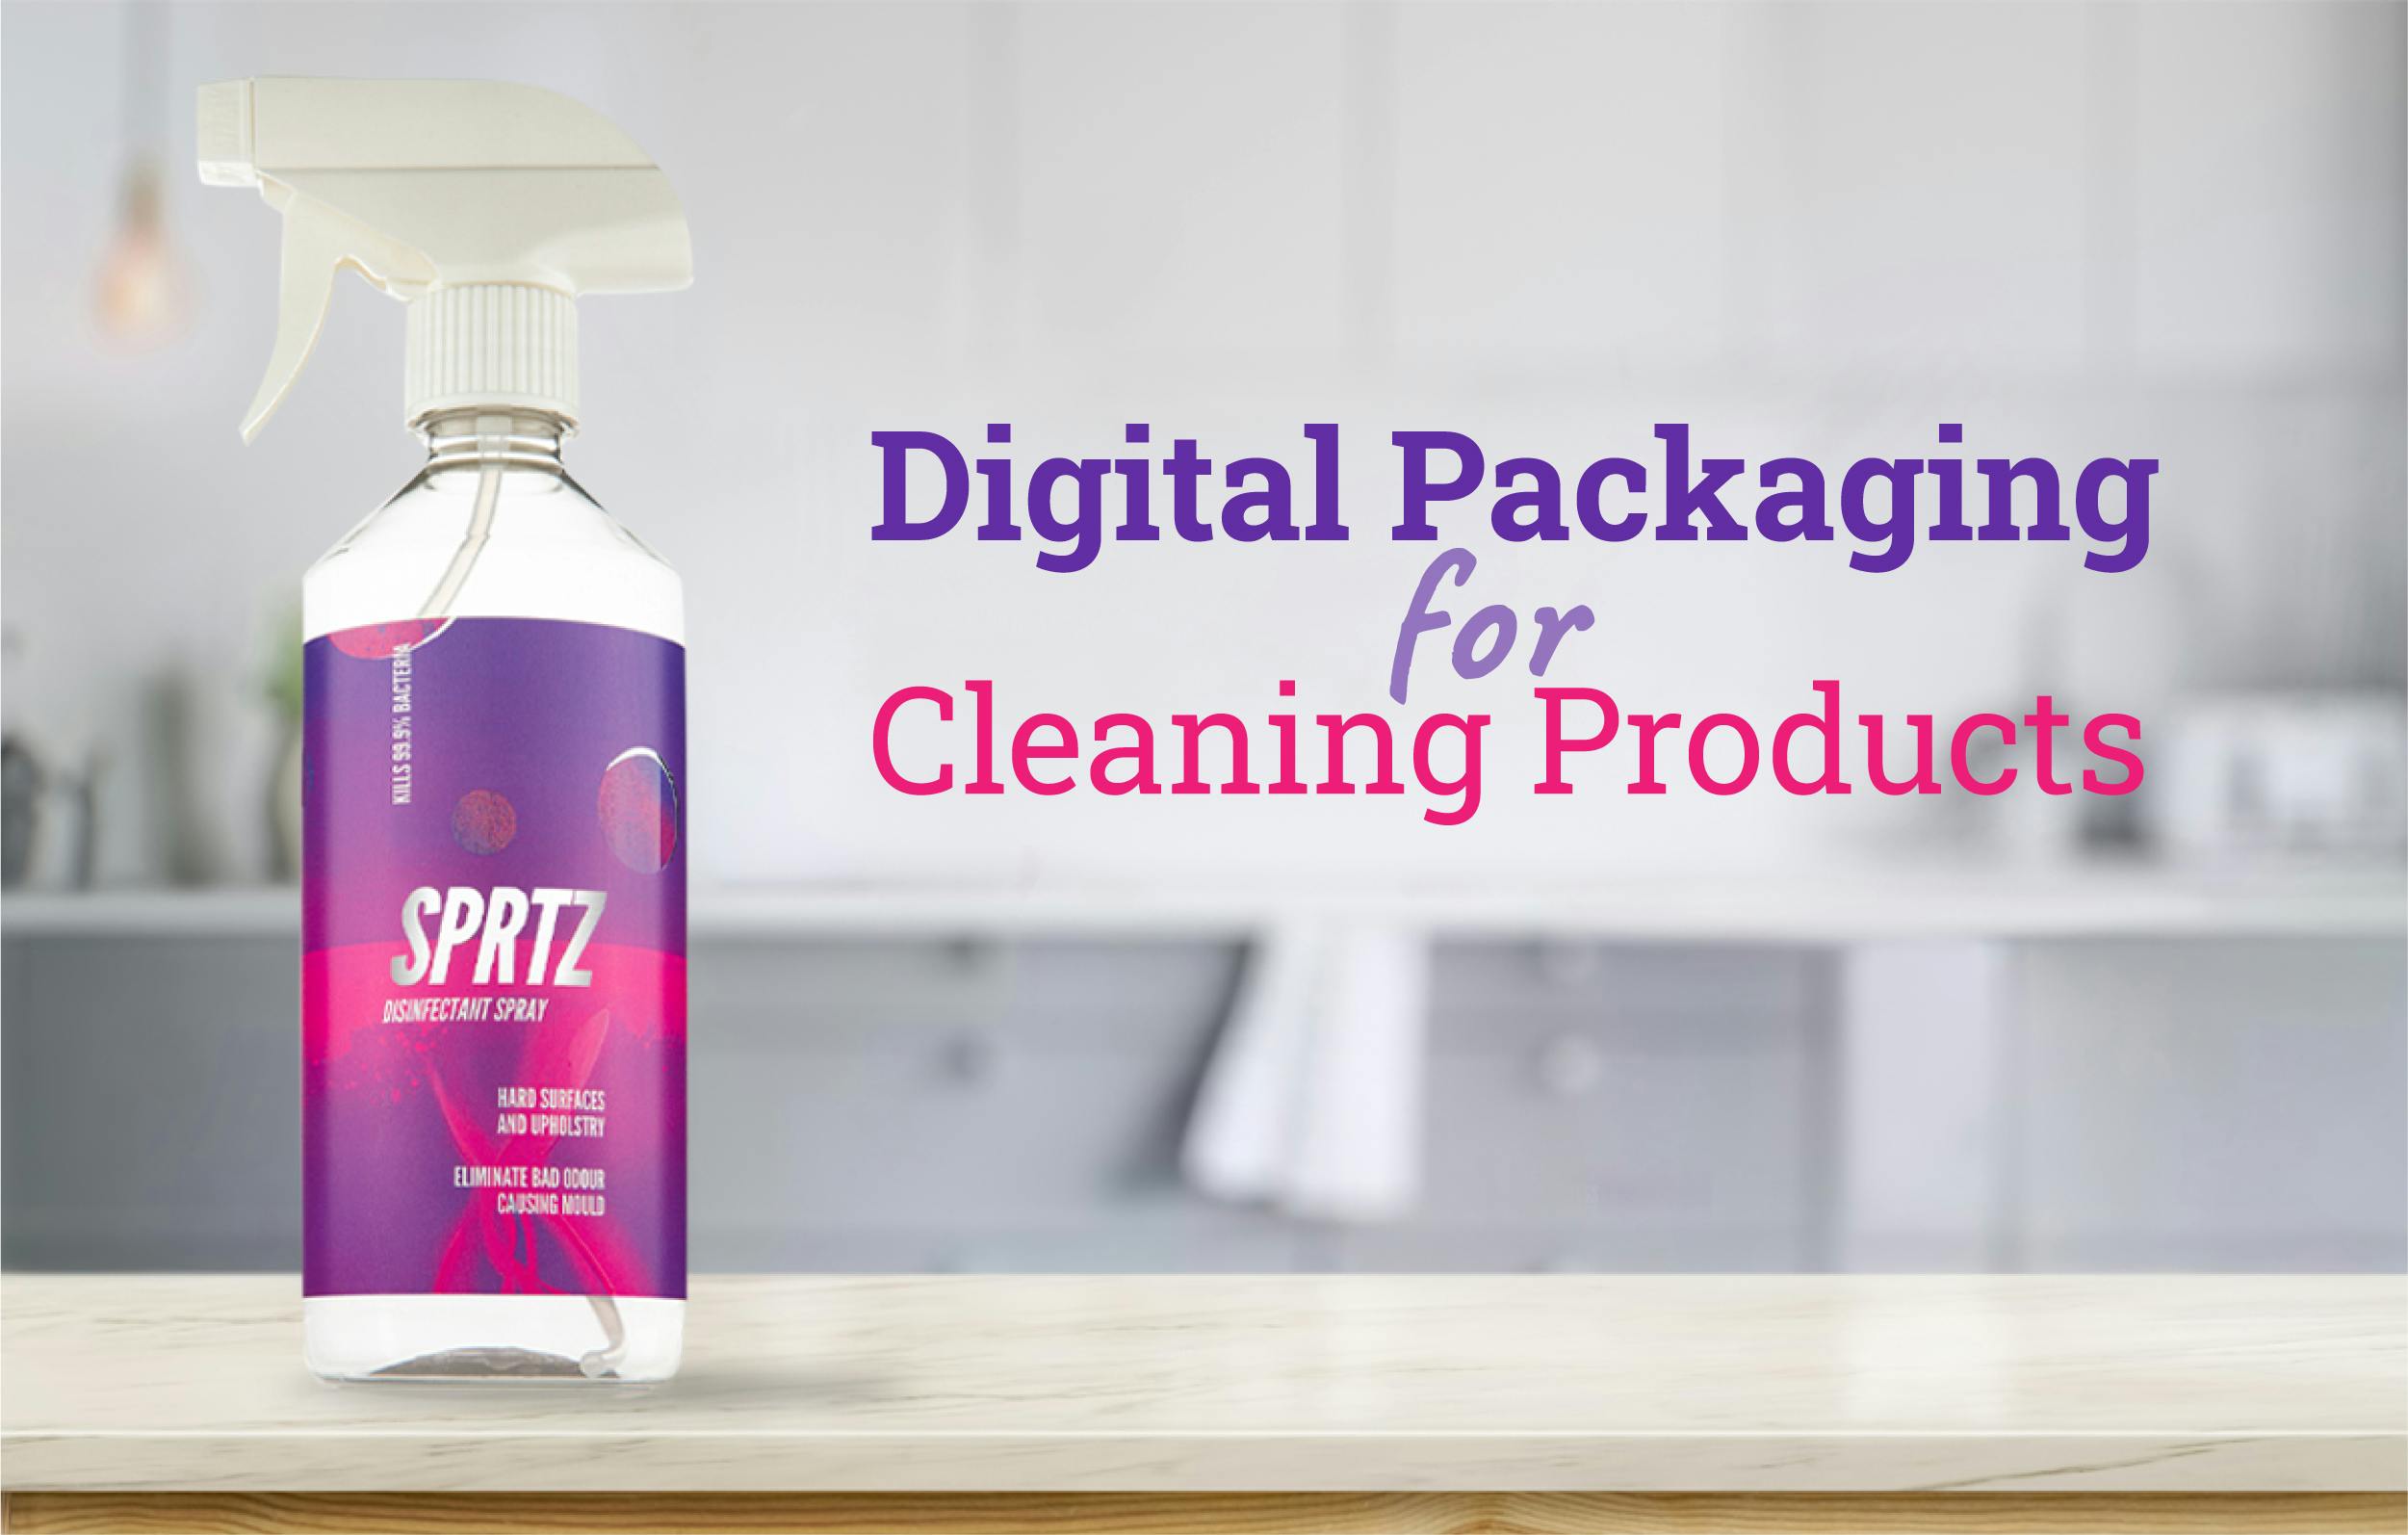 Digital packaging for cleaning products